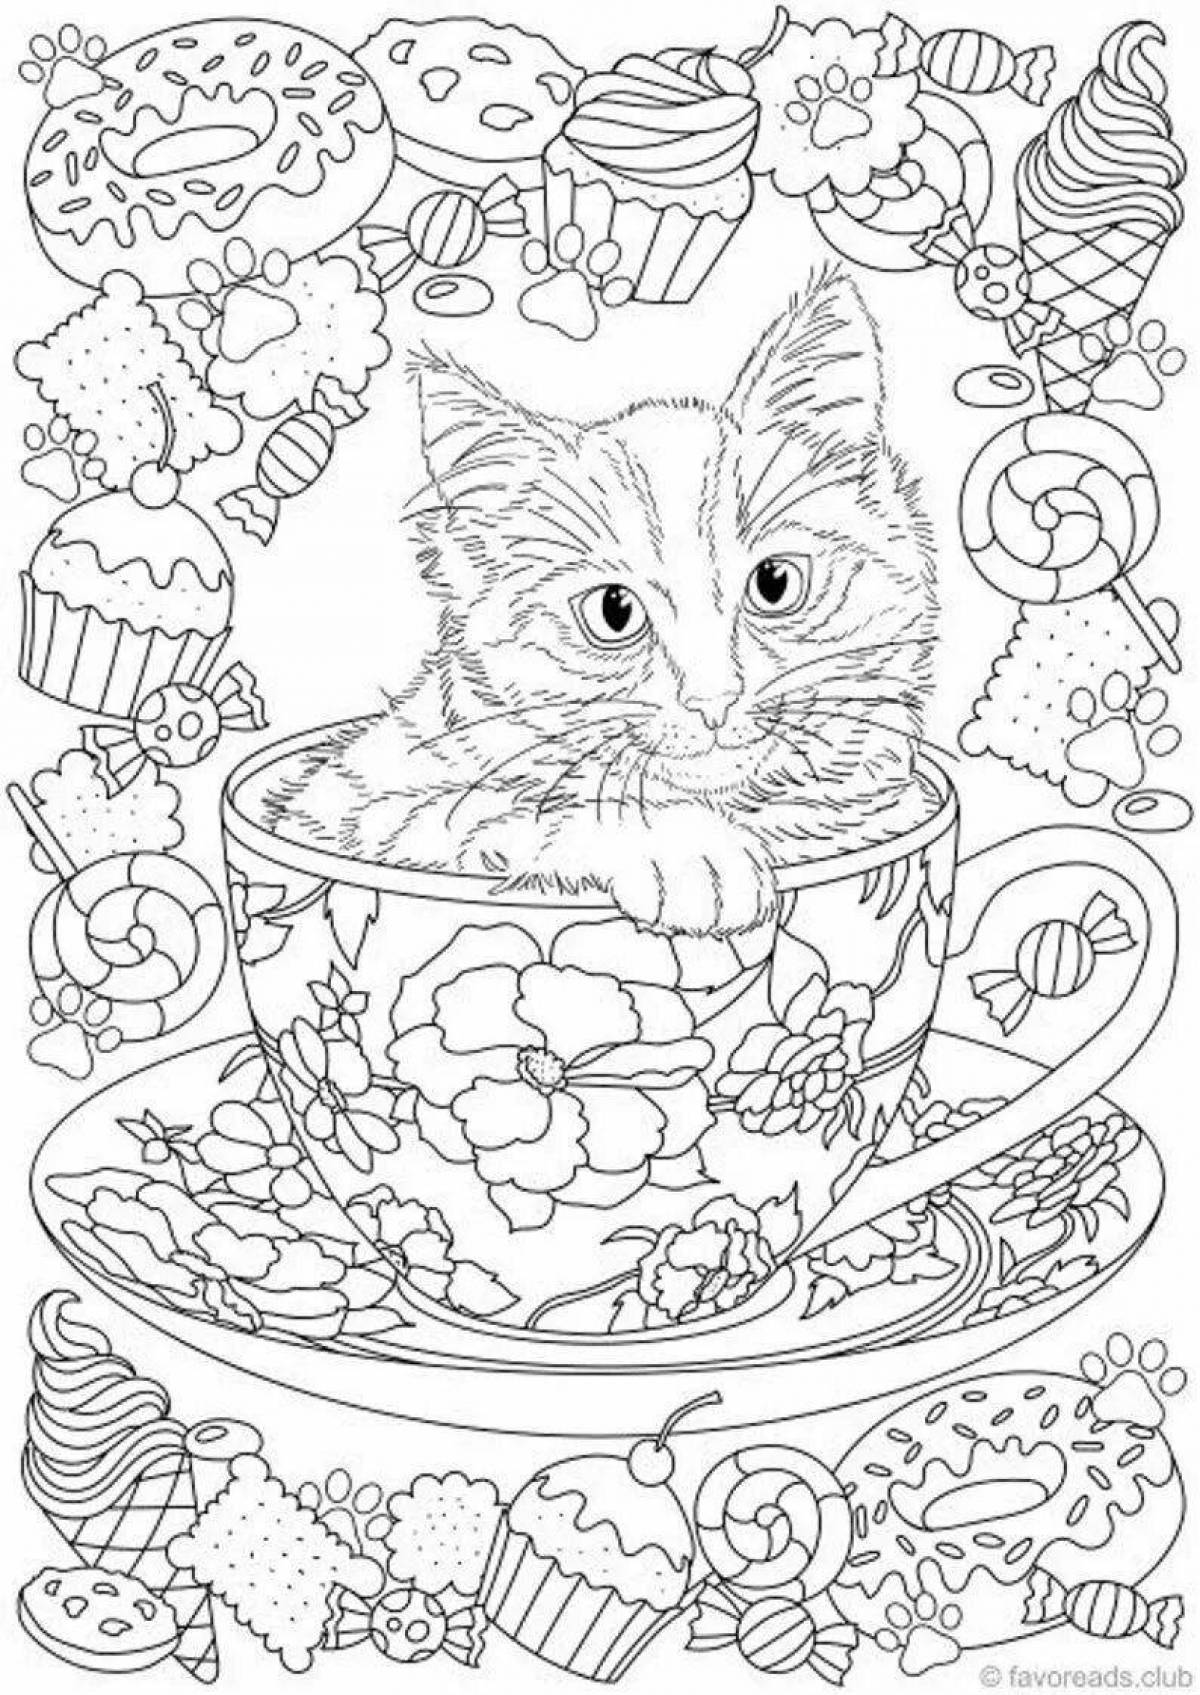 Coloring page fluffy kitten in a mug